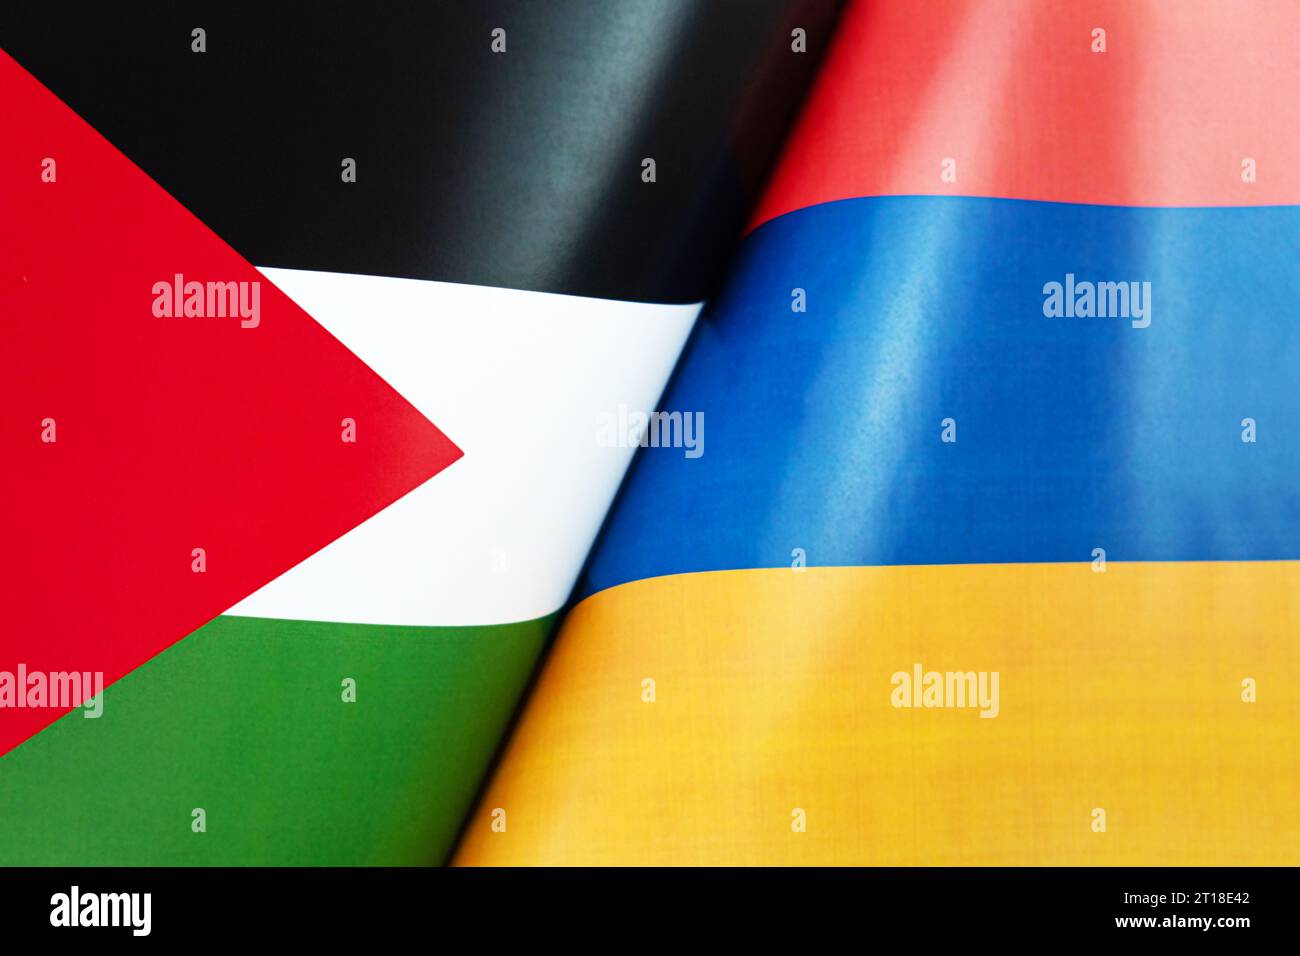 Flags of the palestine and armenia. The concept of international relations between countries. The concept of an alliance or a confrontation between tw Stock Photo